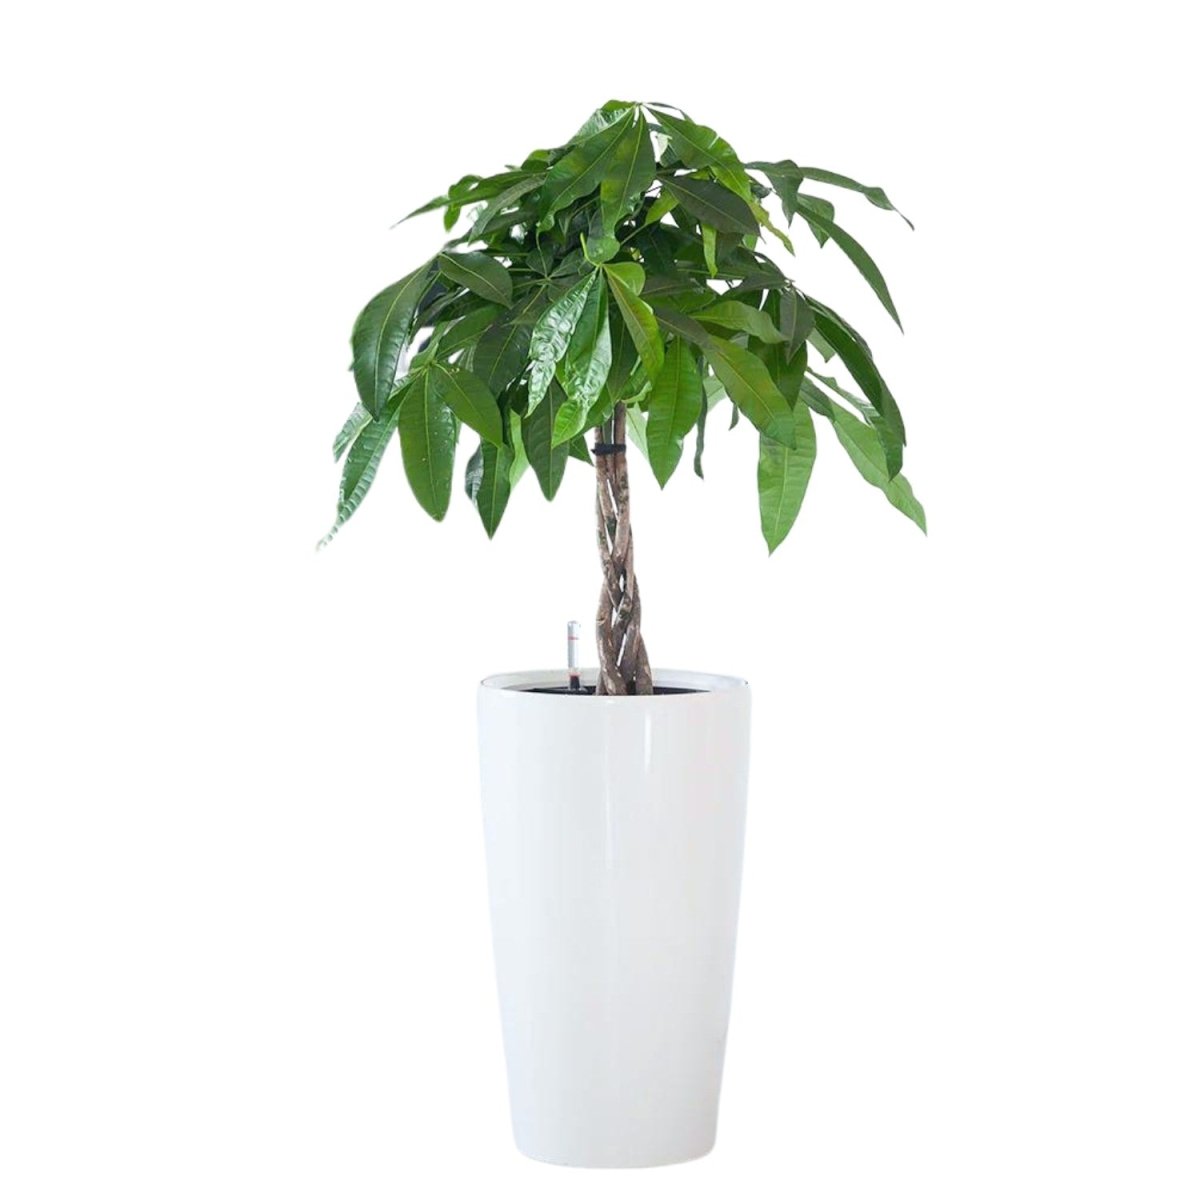 Money Tree Potted In Lechuza Rondo Planter - White - My City Plants